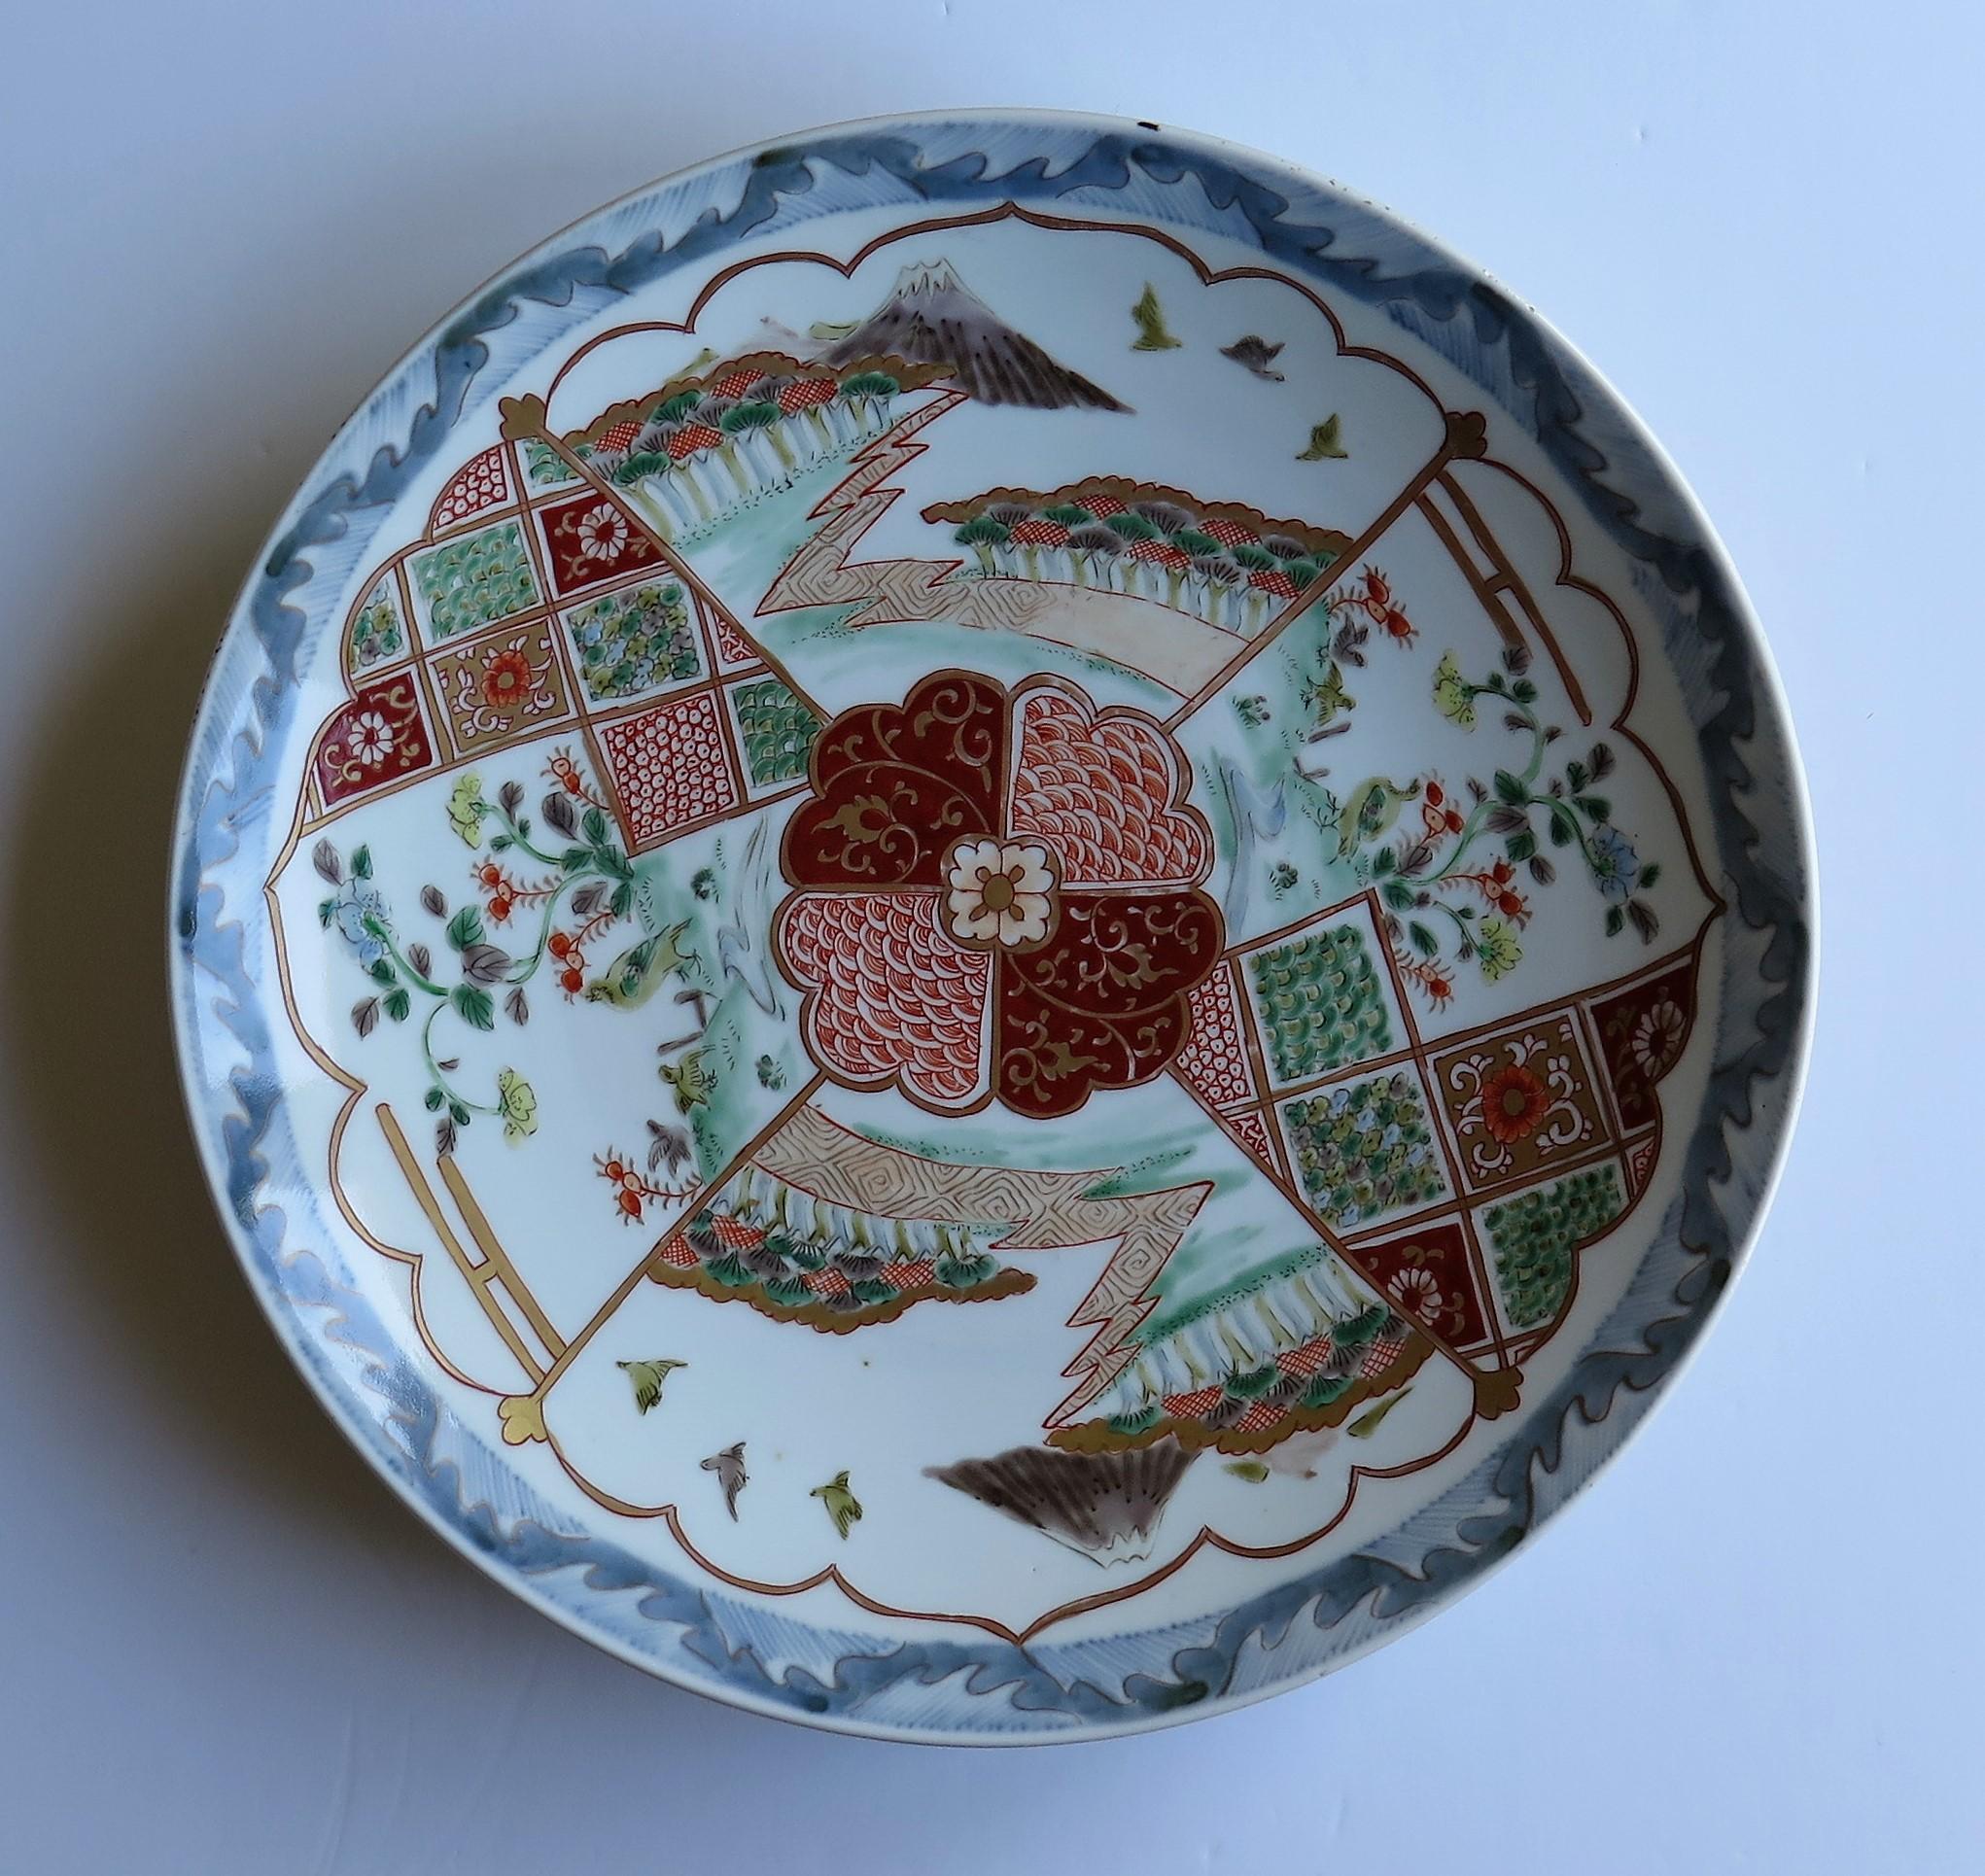 This is an excellent example of a Japanese porcelain Charger or very large plate with a finely hand painted design, dating to the Edo period circa 1840 or possibly earlier.

This charger is a fine hand painted example, decorated with a light